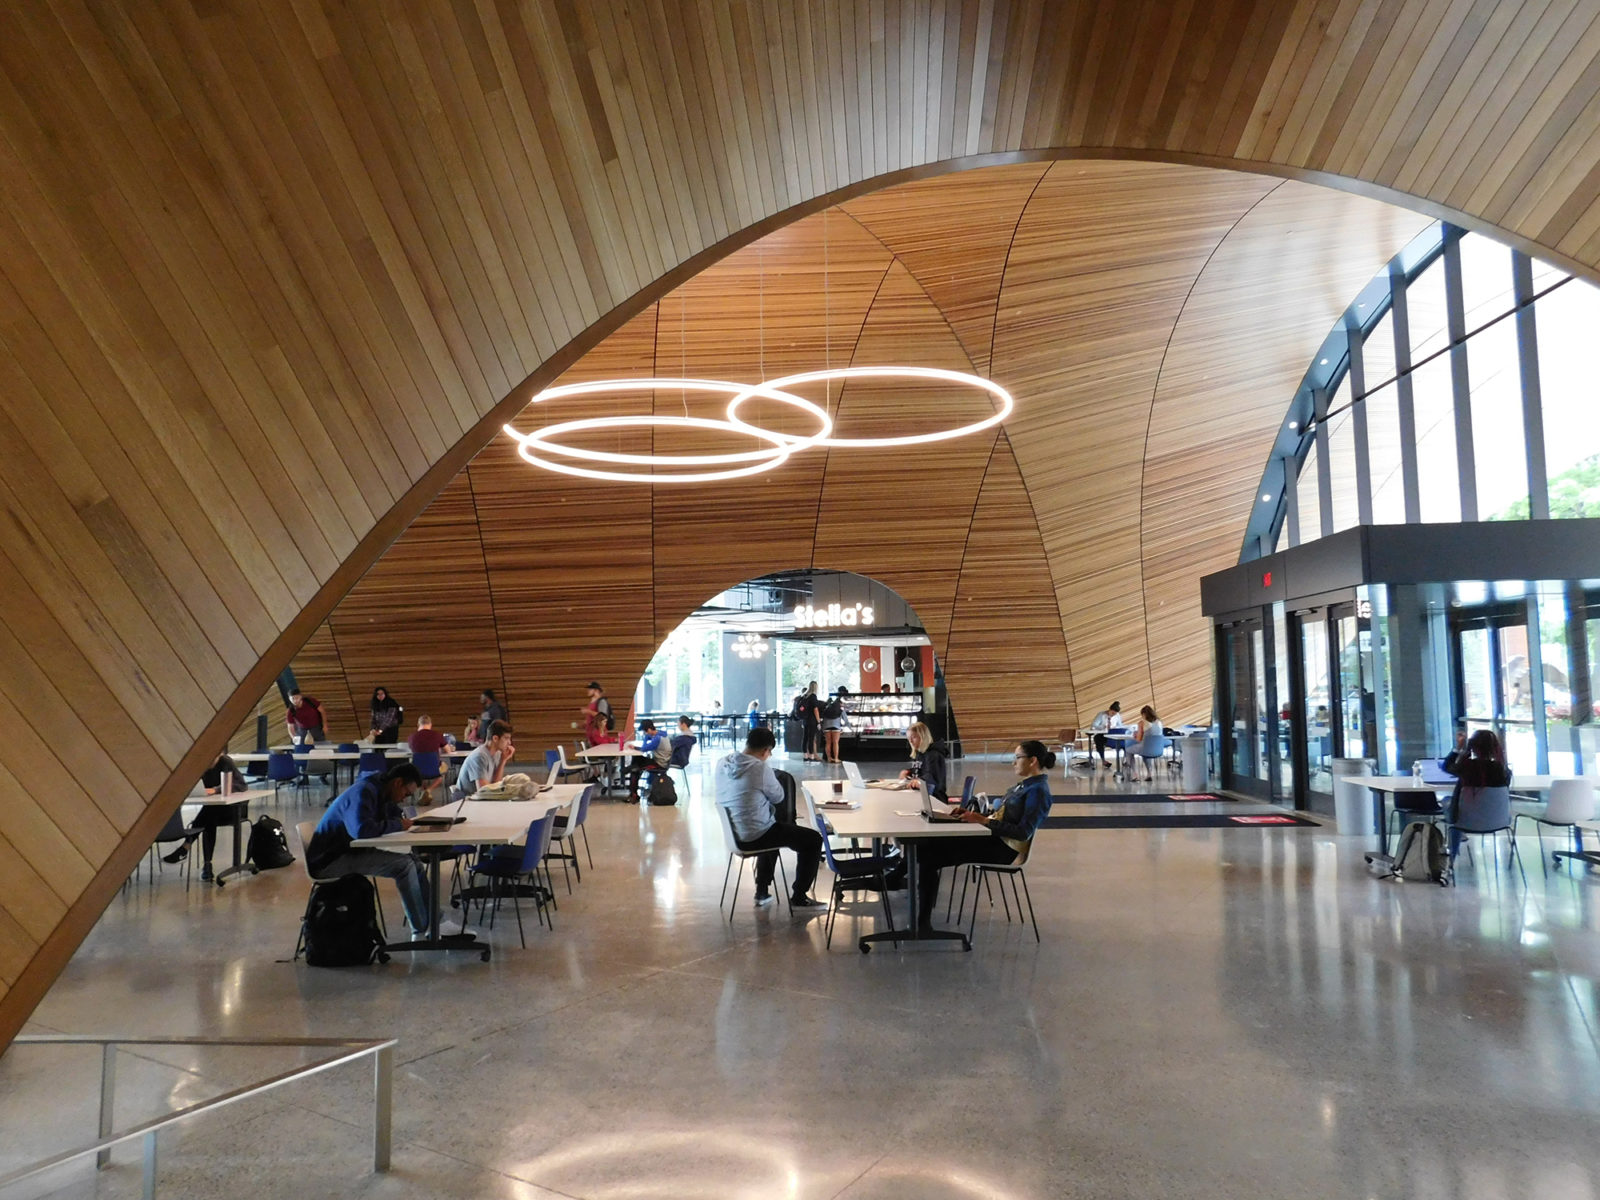 View of open cafe area showing wooden architectural arches and ceilings. Featured accent lighting hangs over clusters of tables and chairs with people.